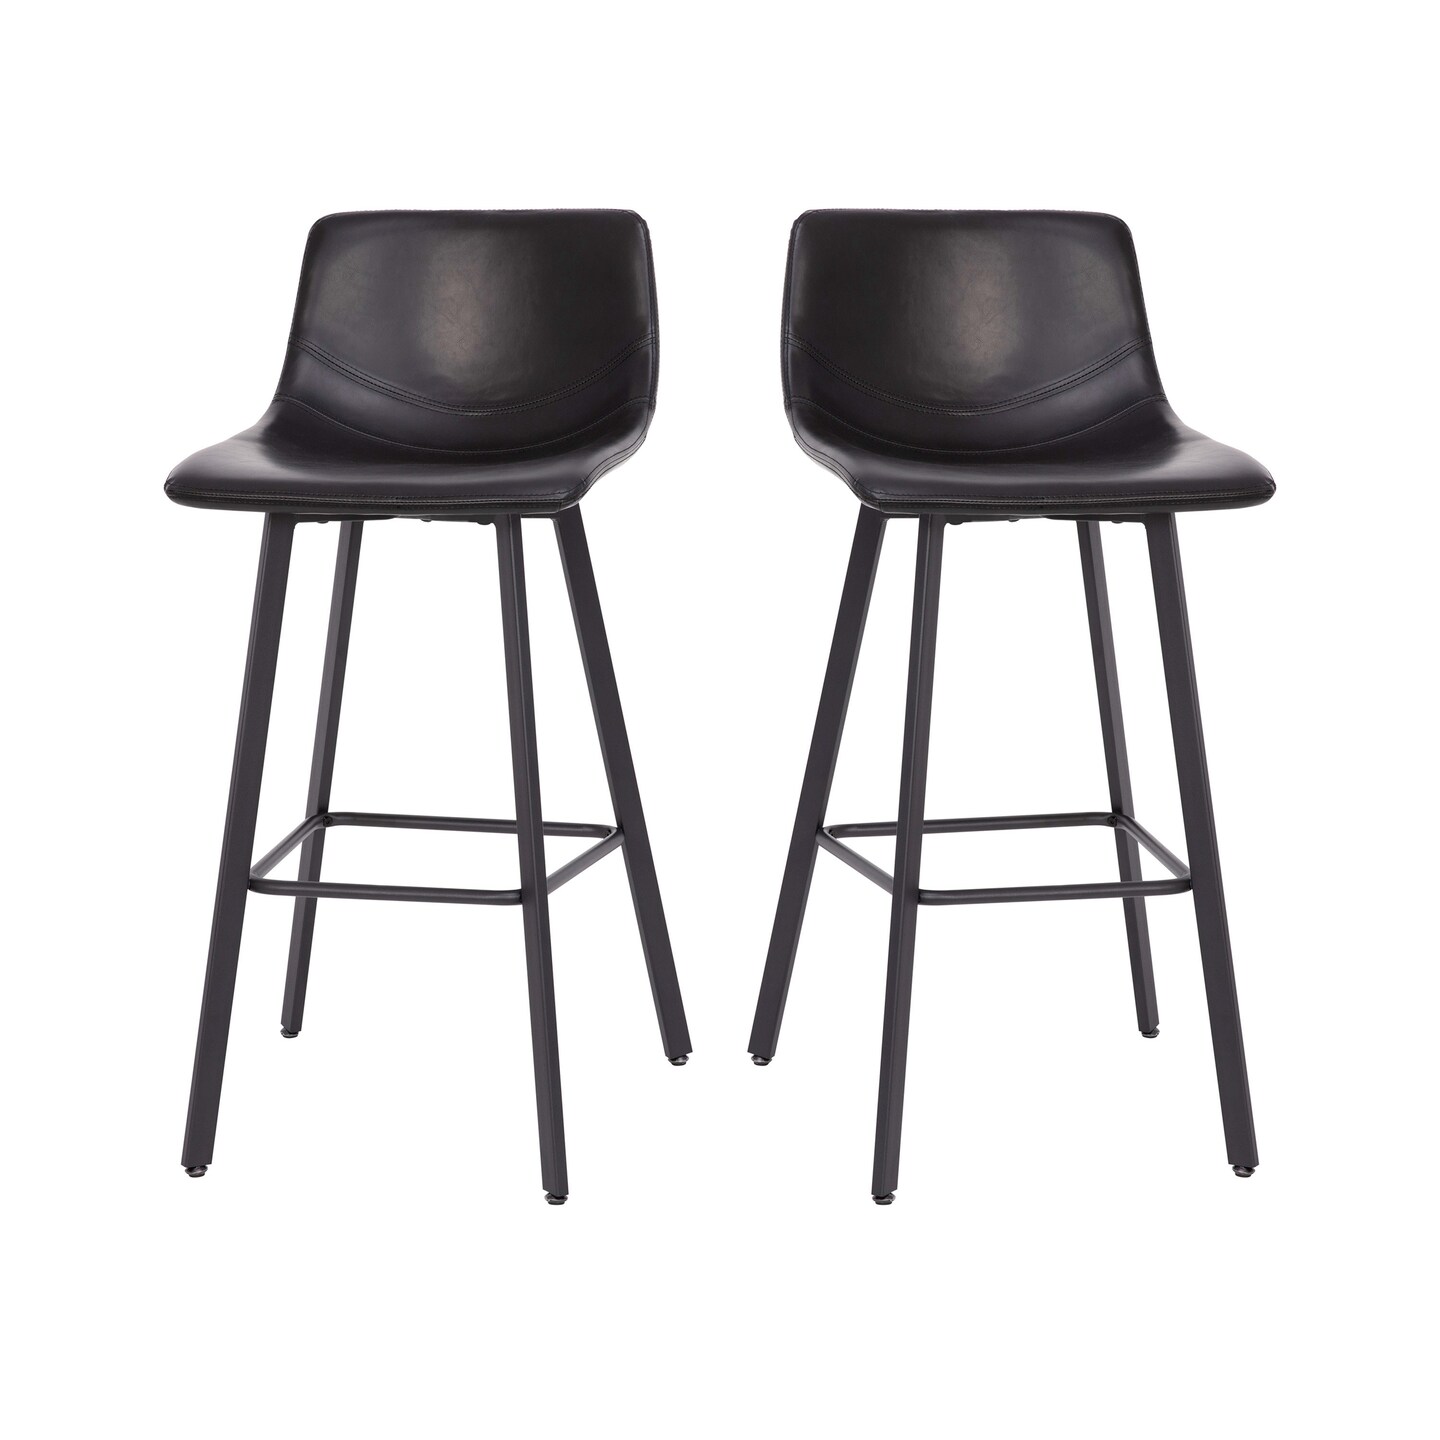 Merrick Lane Oretha Set of 2 Modern Upholstered Stools with Contoured, Low Back Bucket Seats and Iron Frames